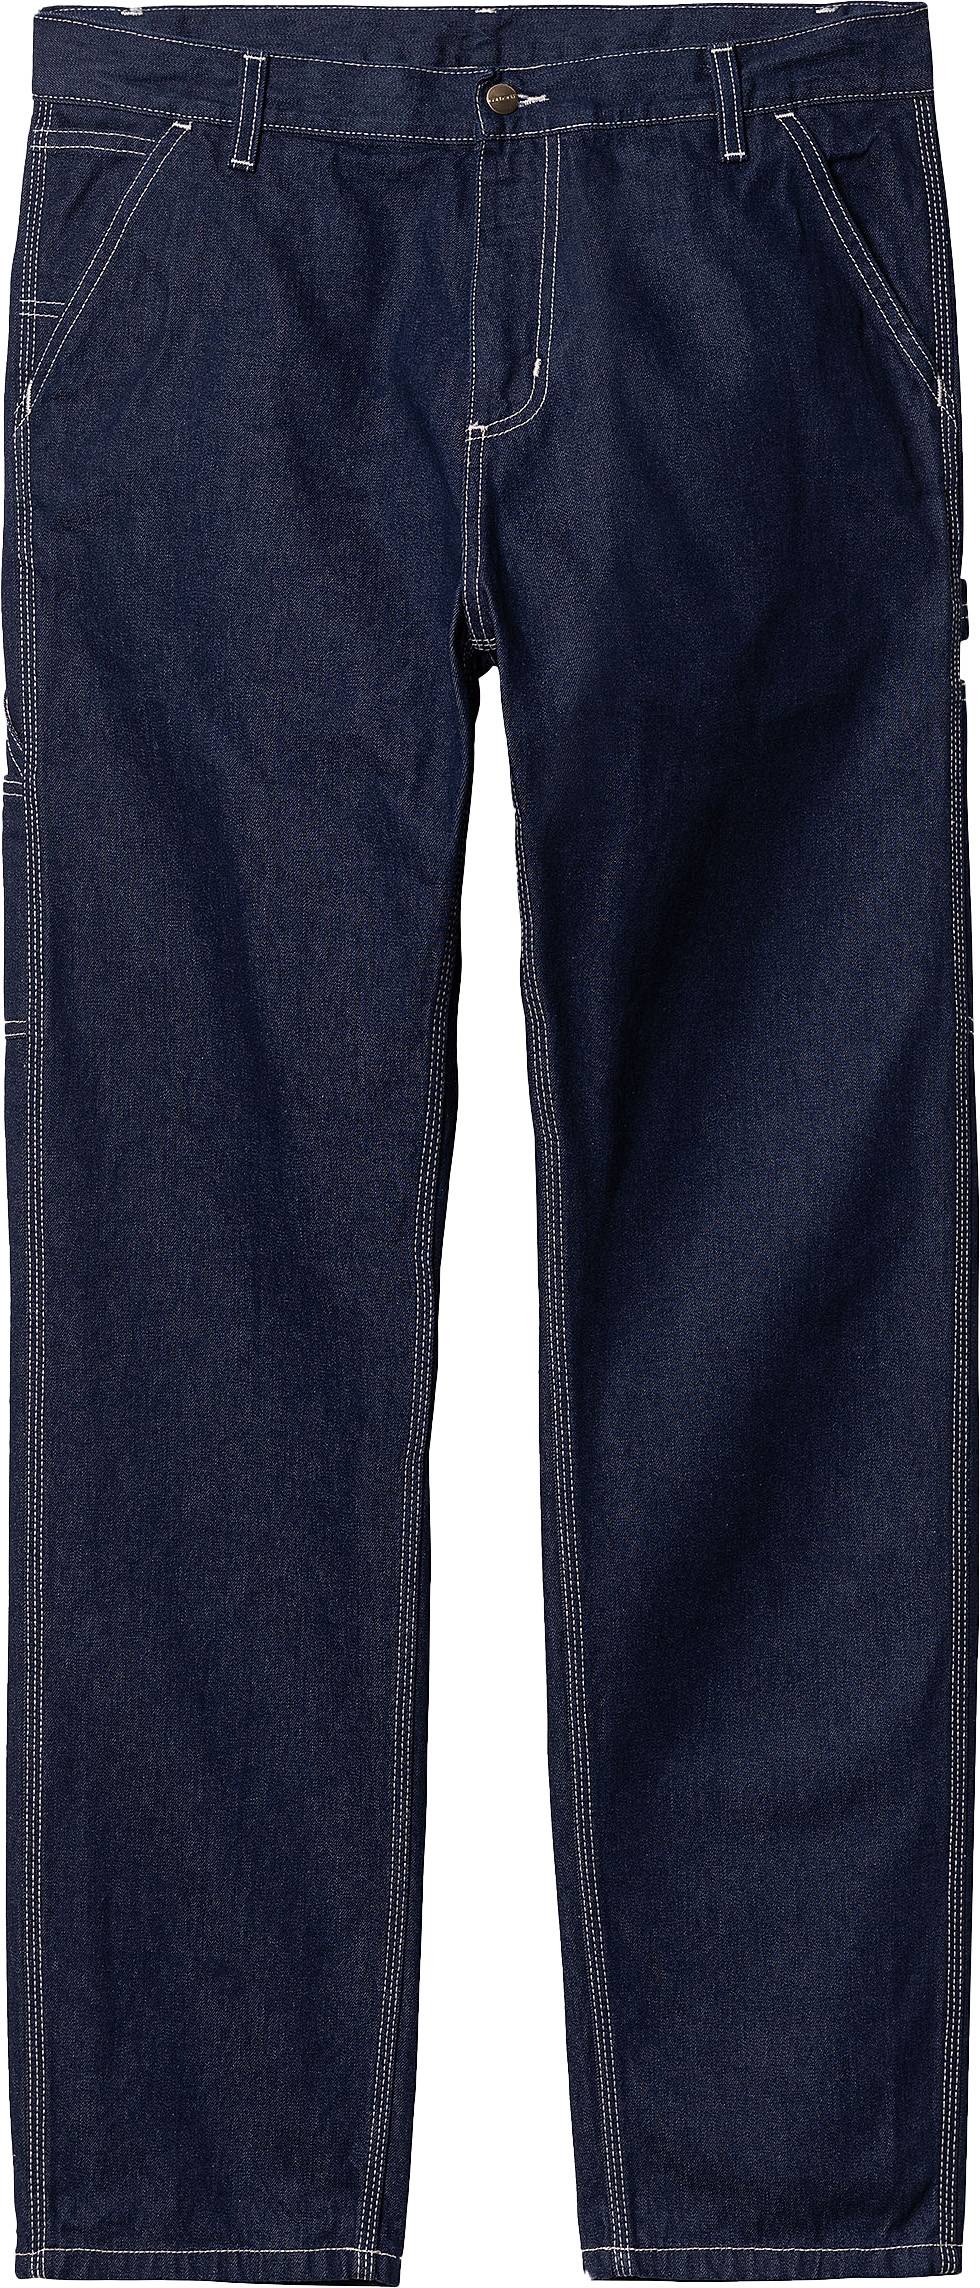  Carhartt Wip Jeans Ruck Single Knee Pant Blue One Wash Uomo - 2